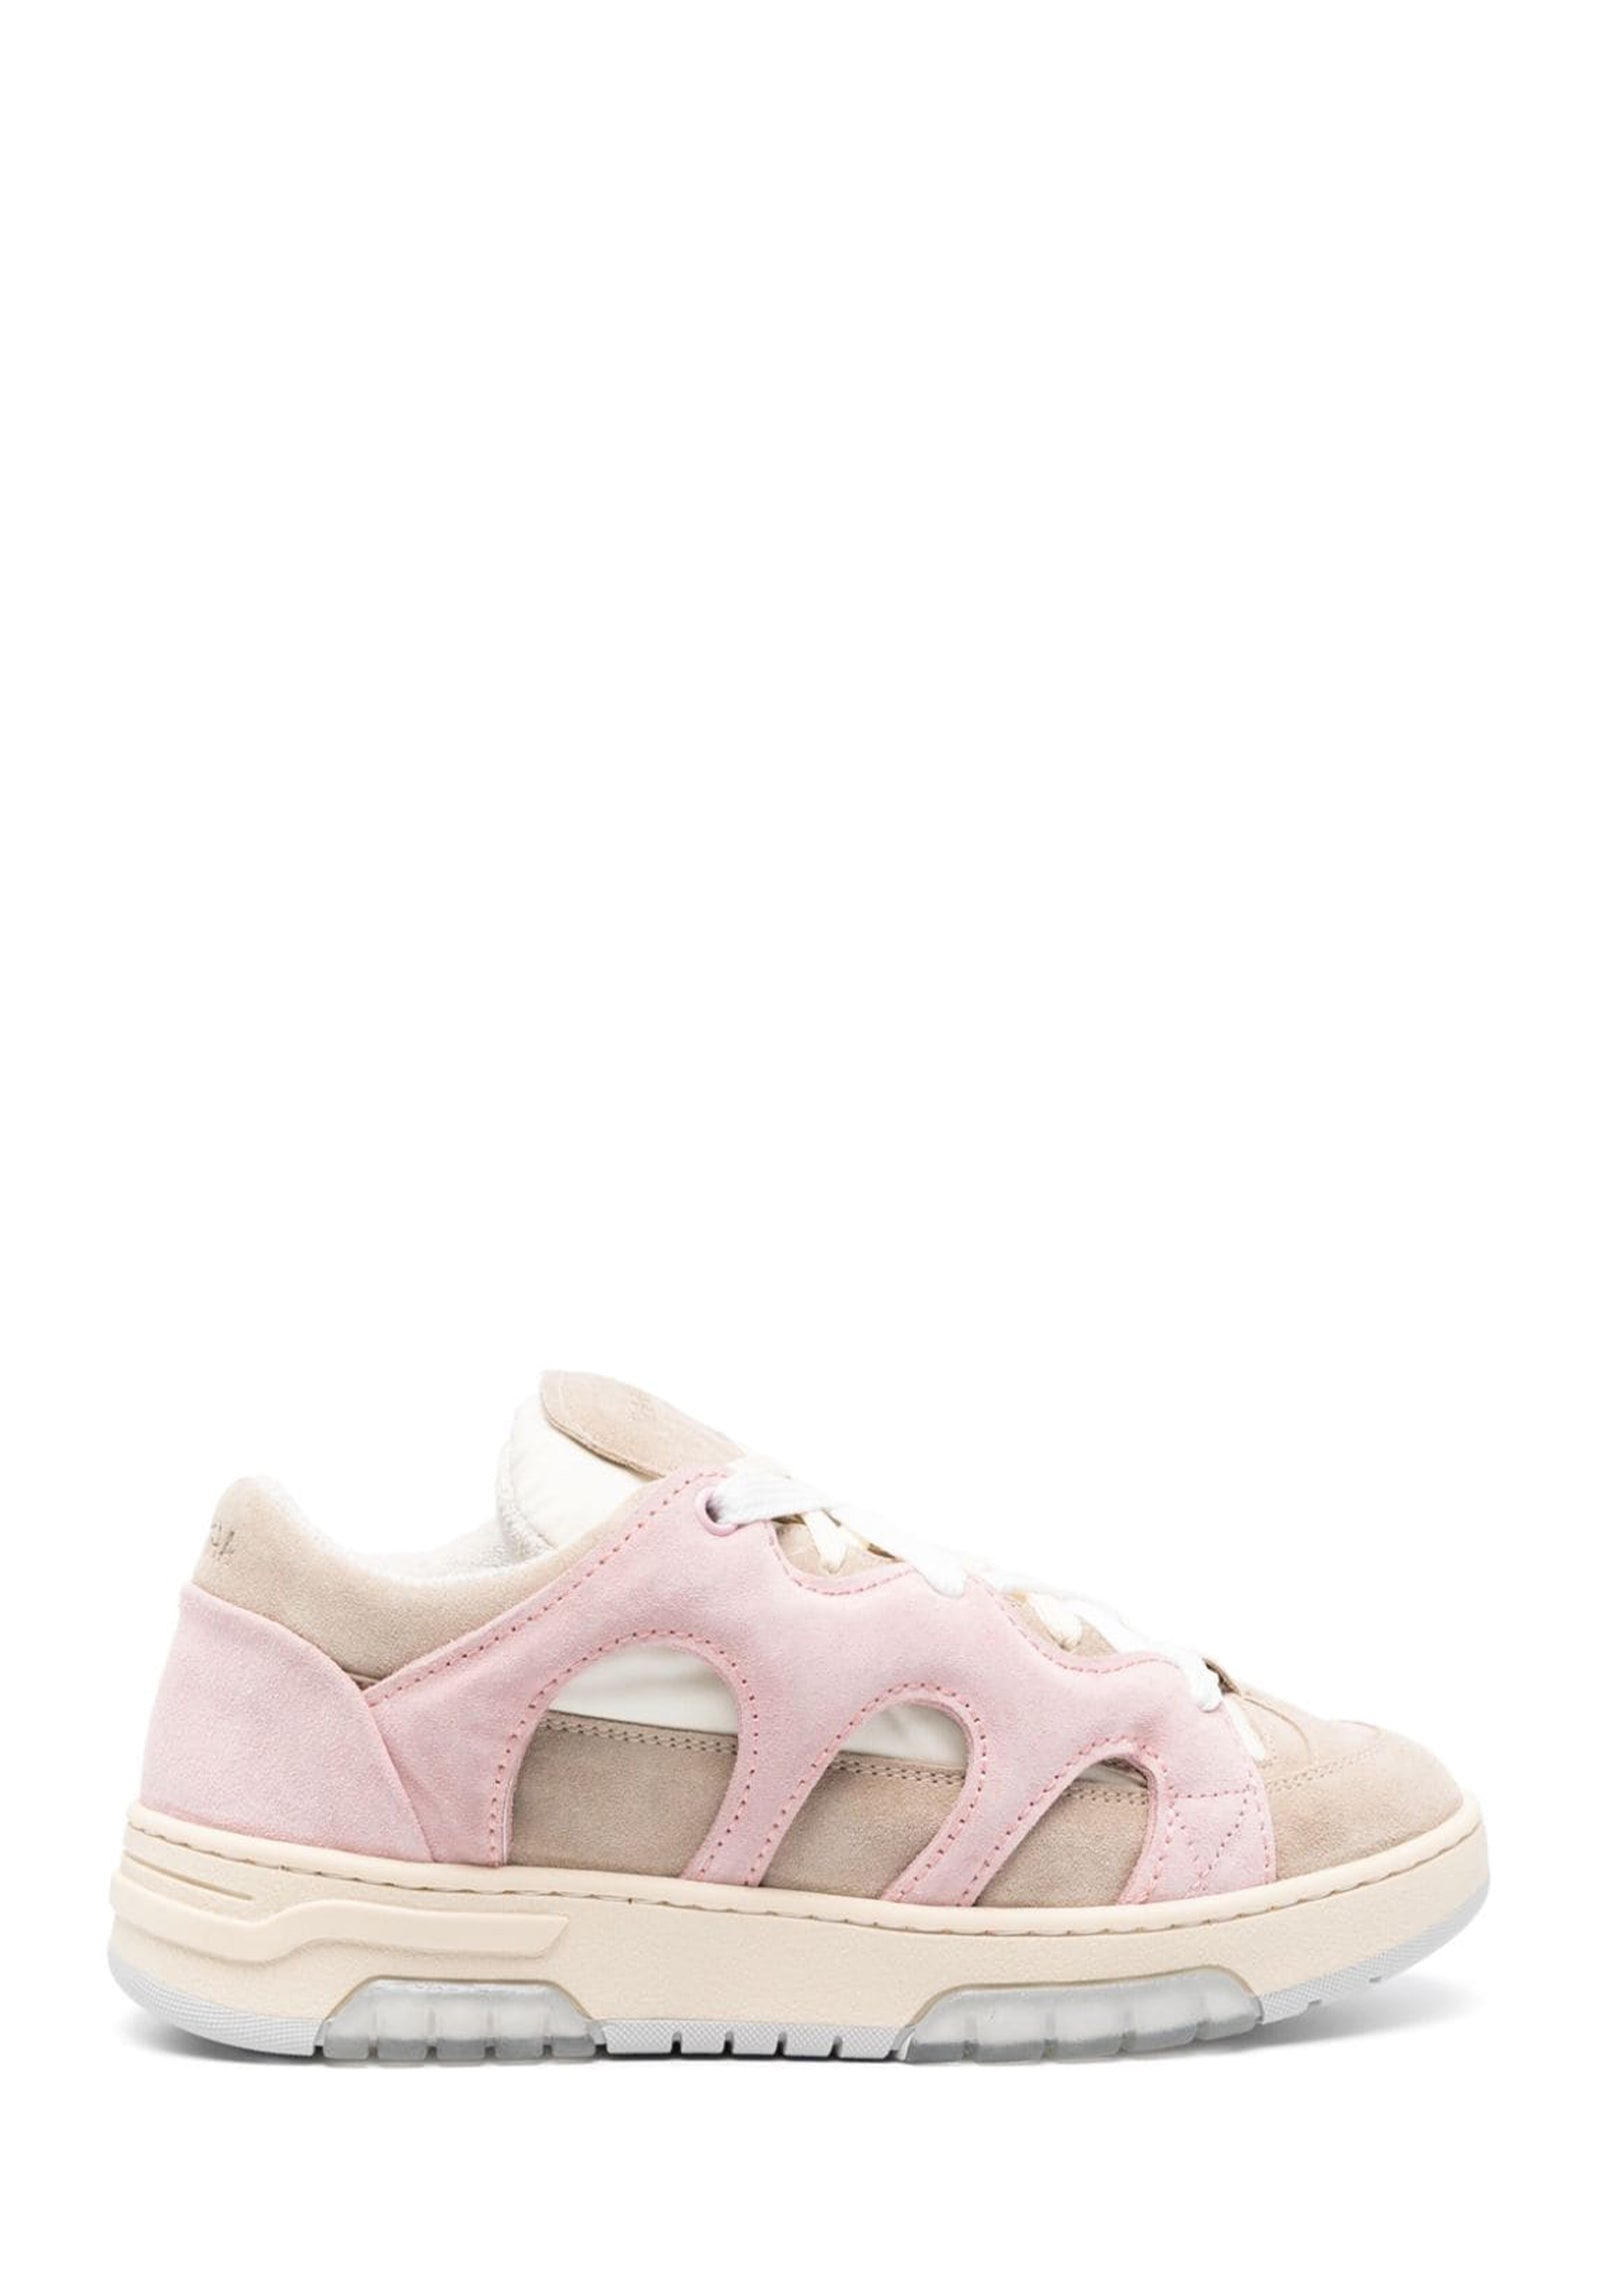 Sneakers Santha Pink/Dove